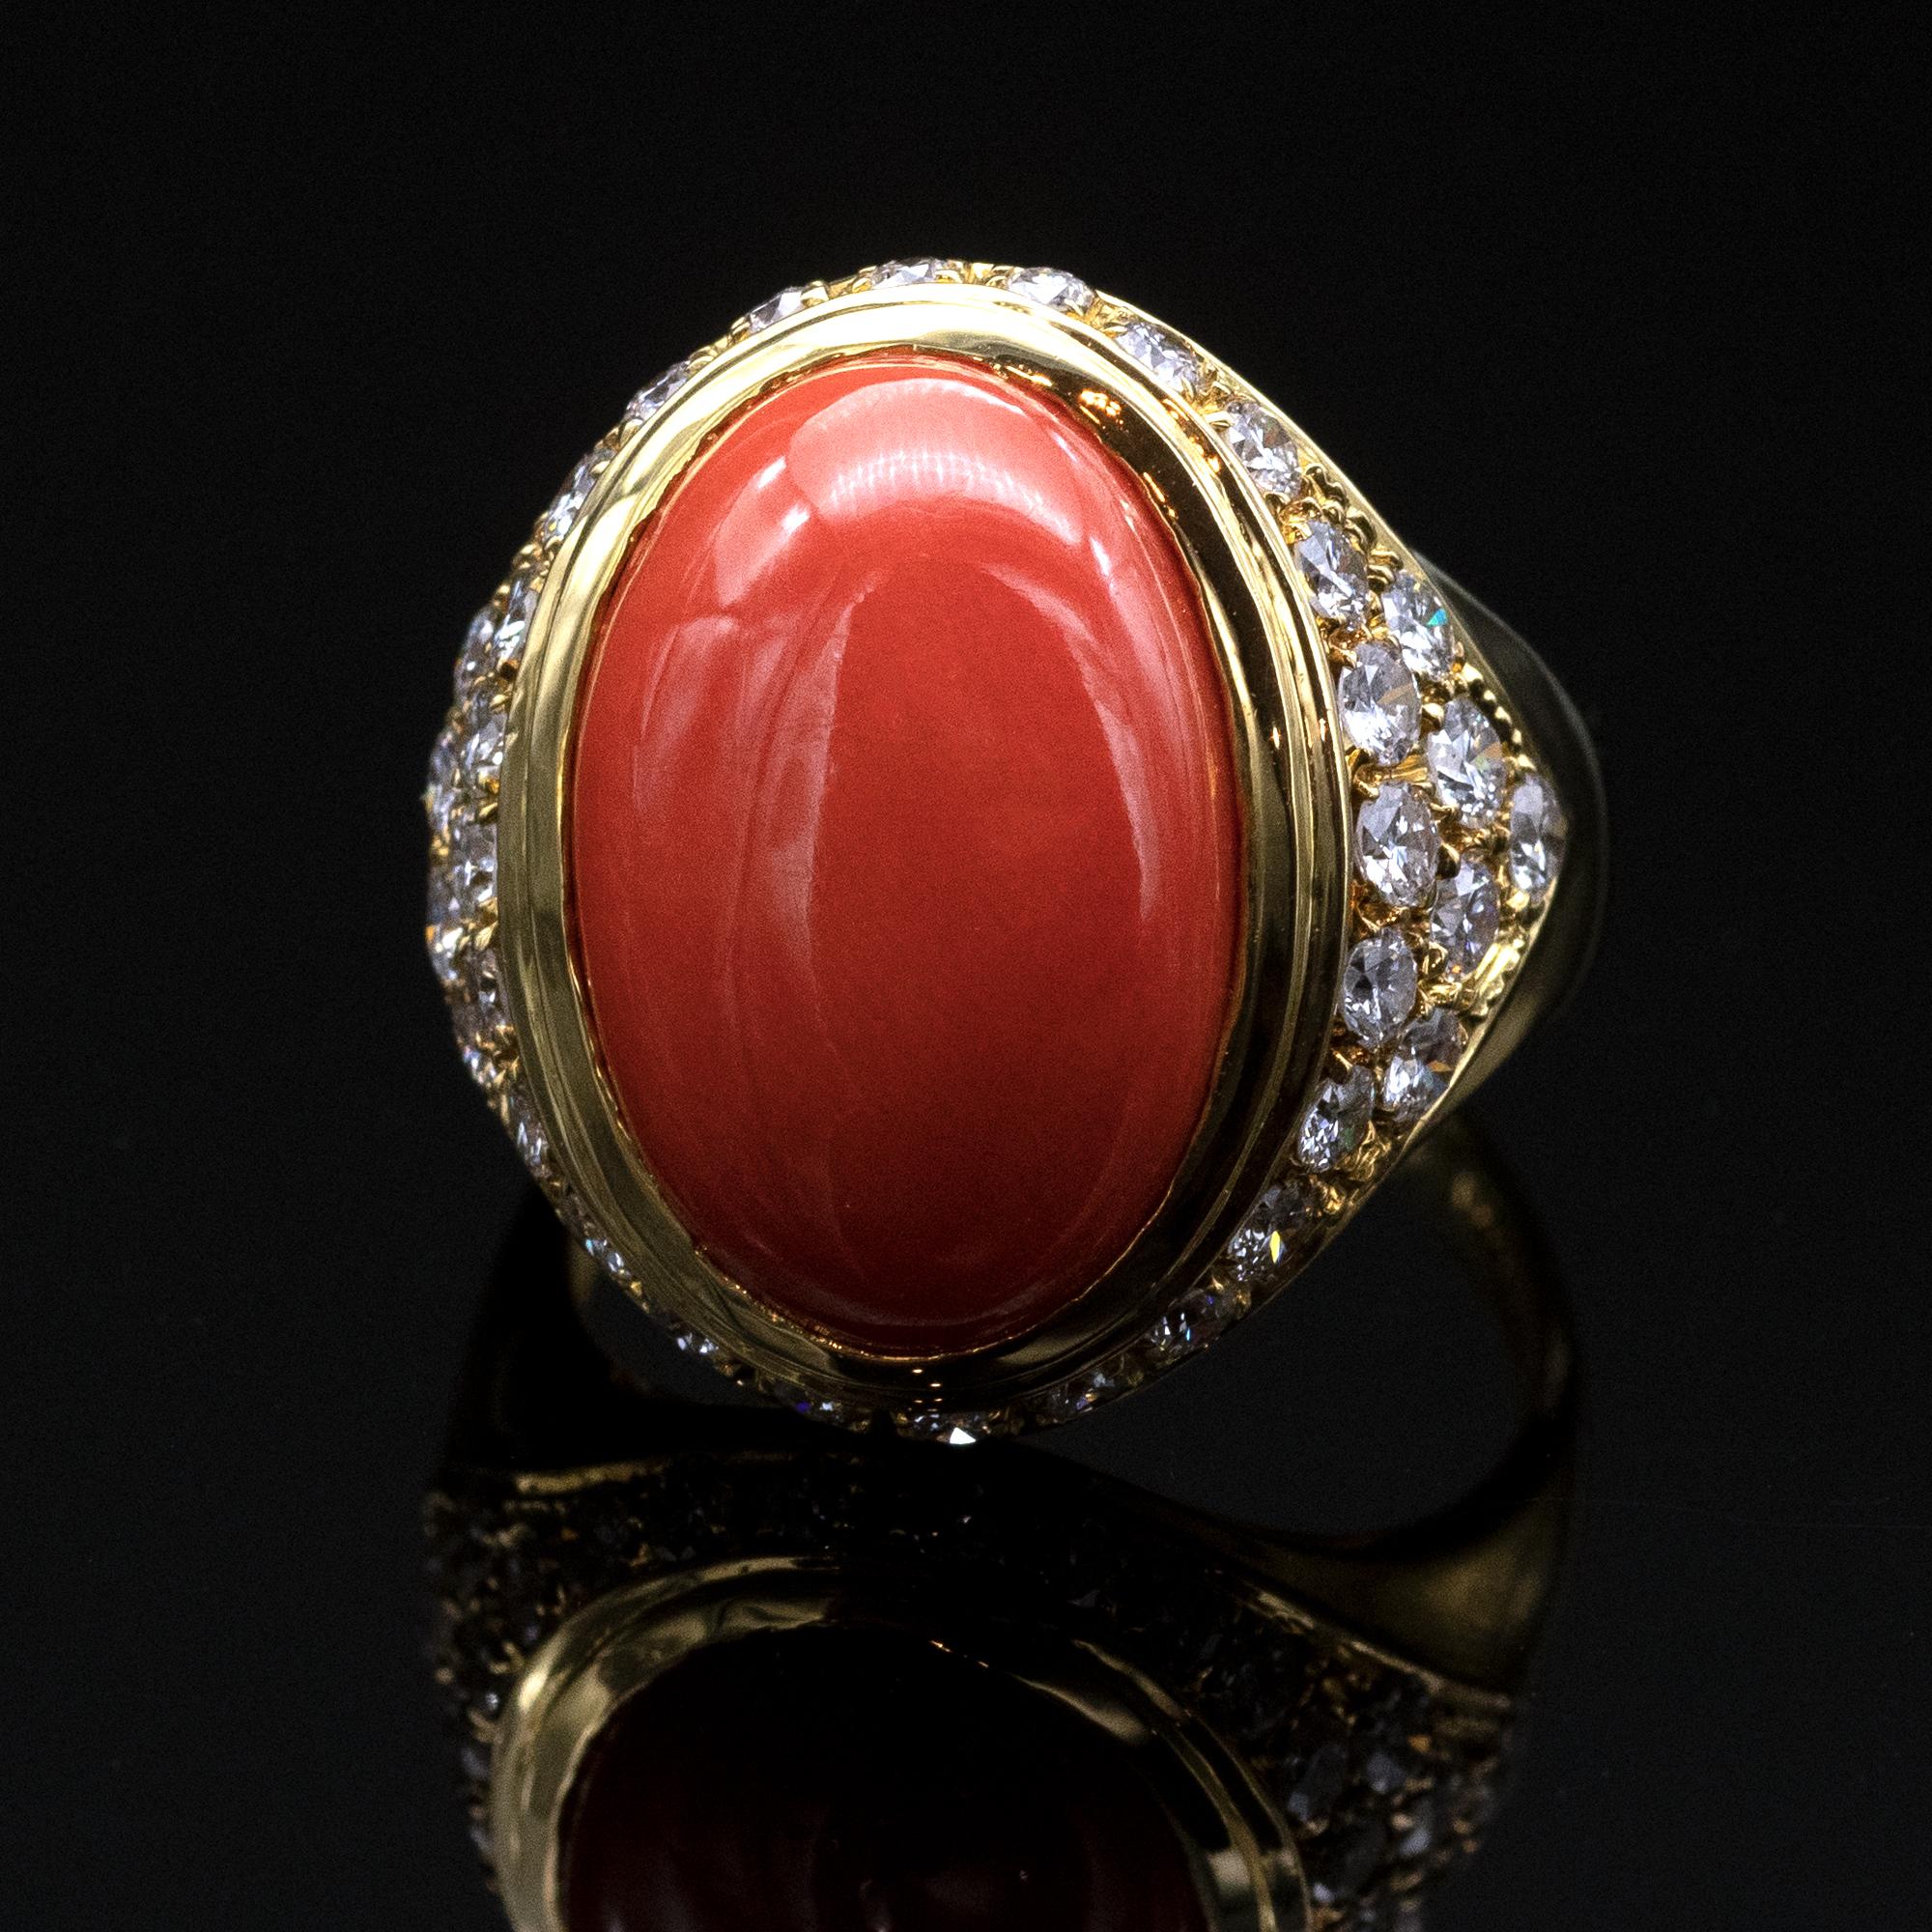 Elegant 18 karat yellow gold cocktail ring showcasing an oval coral measuring ± 17 x 16.5 mm is set in its center highlighted with approx 1.12 carat of white diamonds  (FG VS).
A matching necklace and earring are also available
